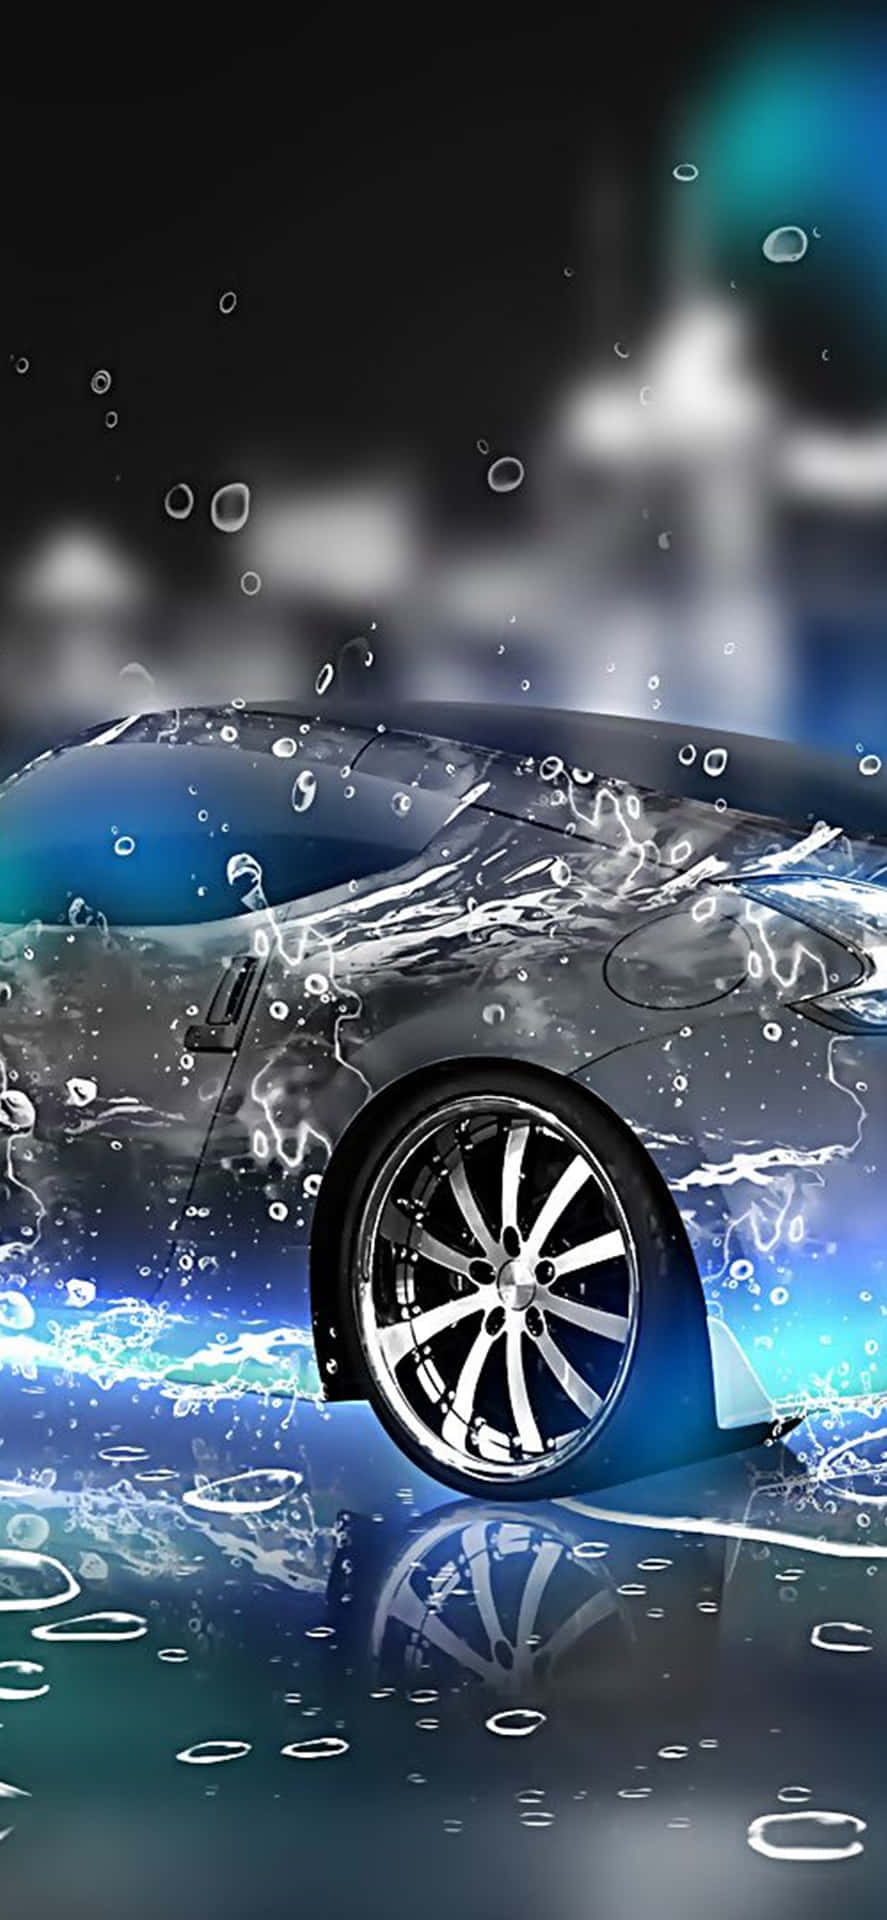 Iphone Xs Desktop Pc Silver Car Water Background